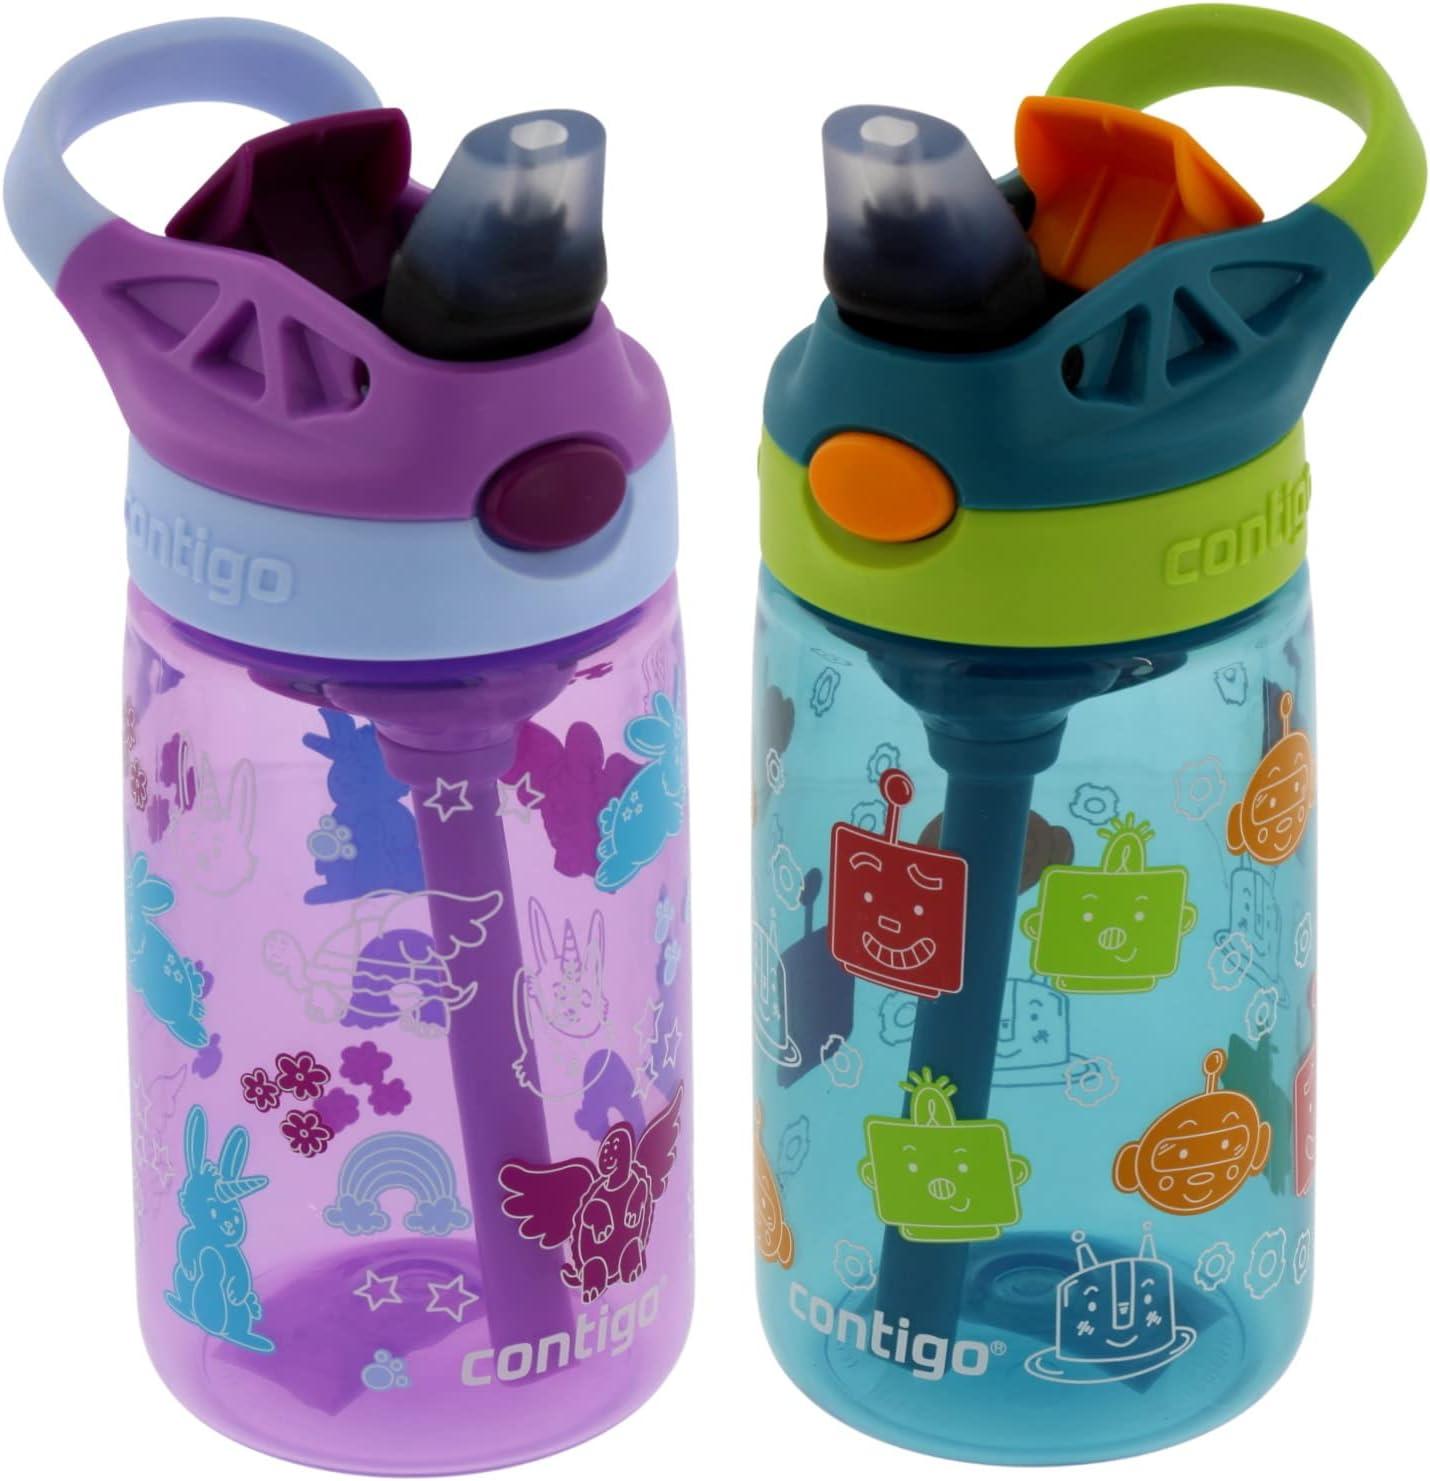 Contigo 14 oz Kids Plastic Water Bottle with Straw Lid 2 Pack